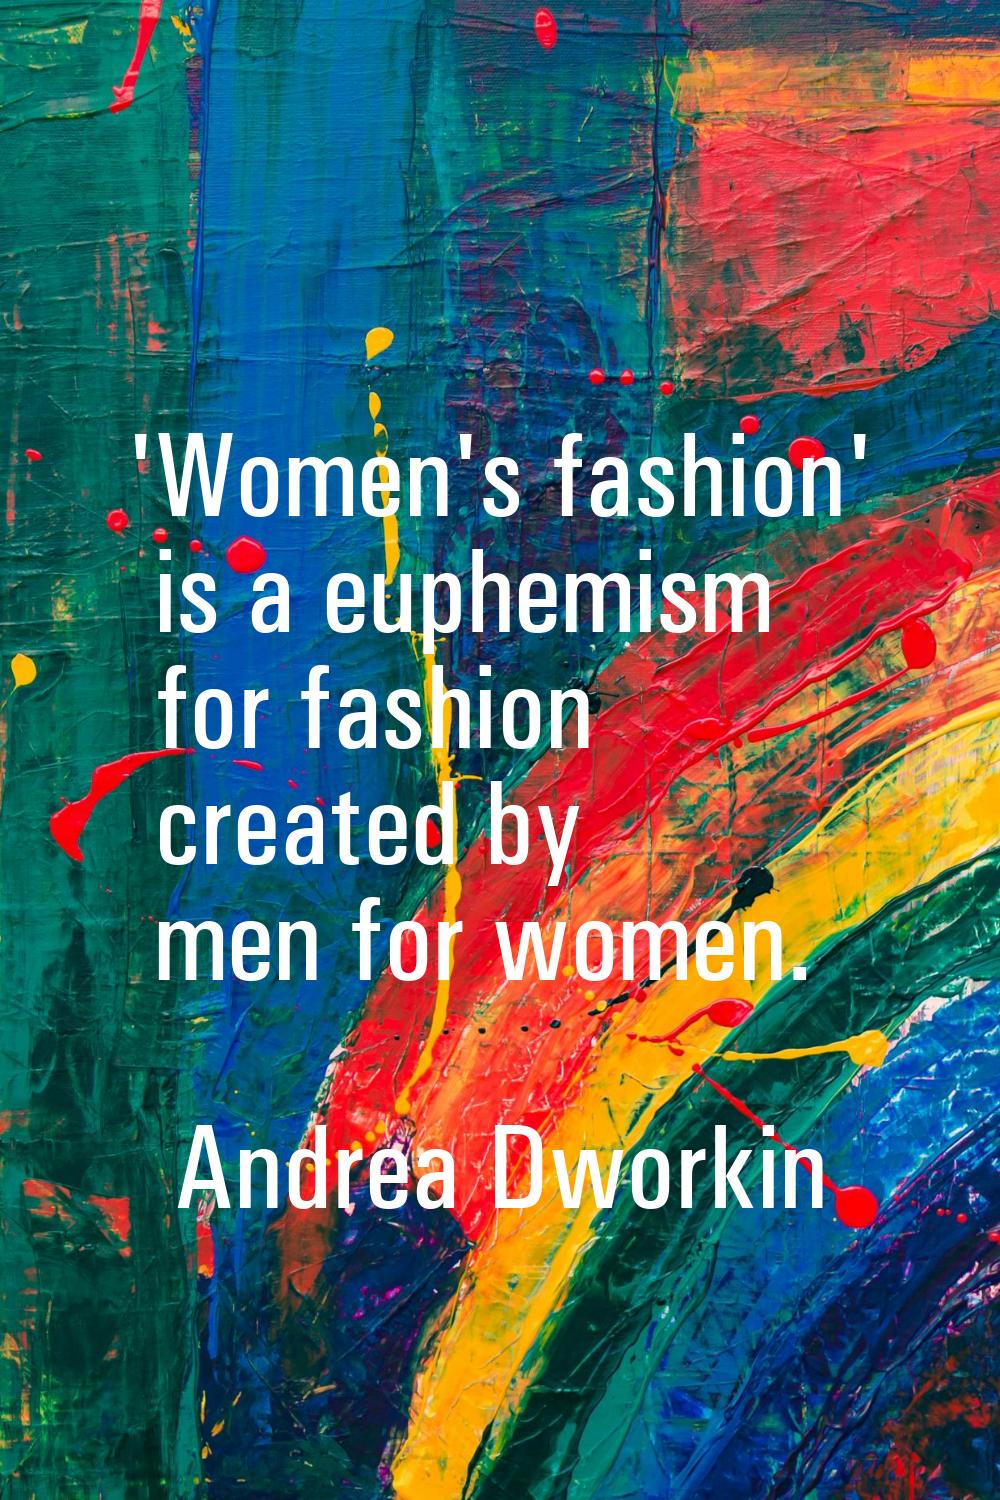 'Women's fashion' is a euphemism for fashion created by men for women.